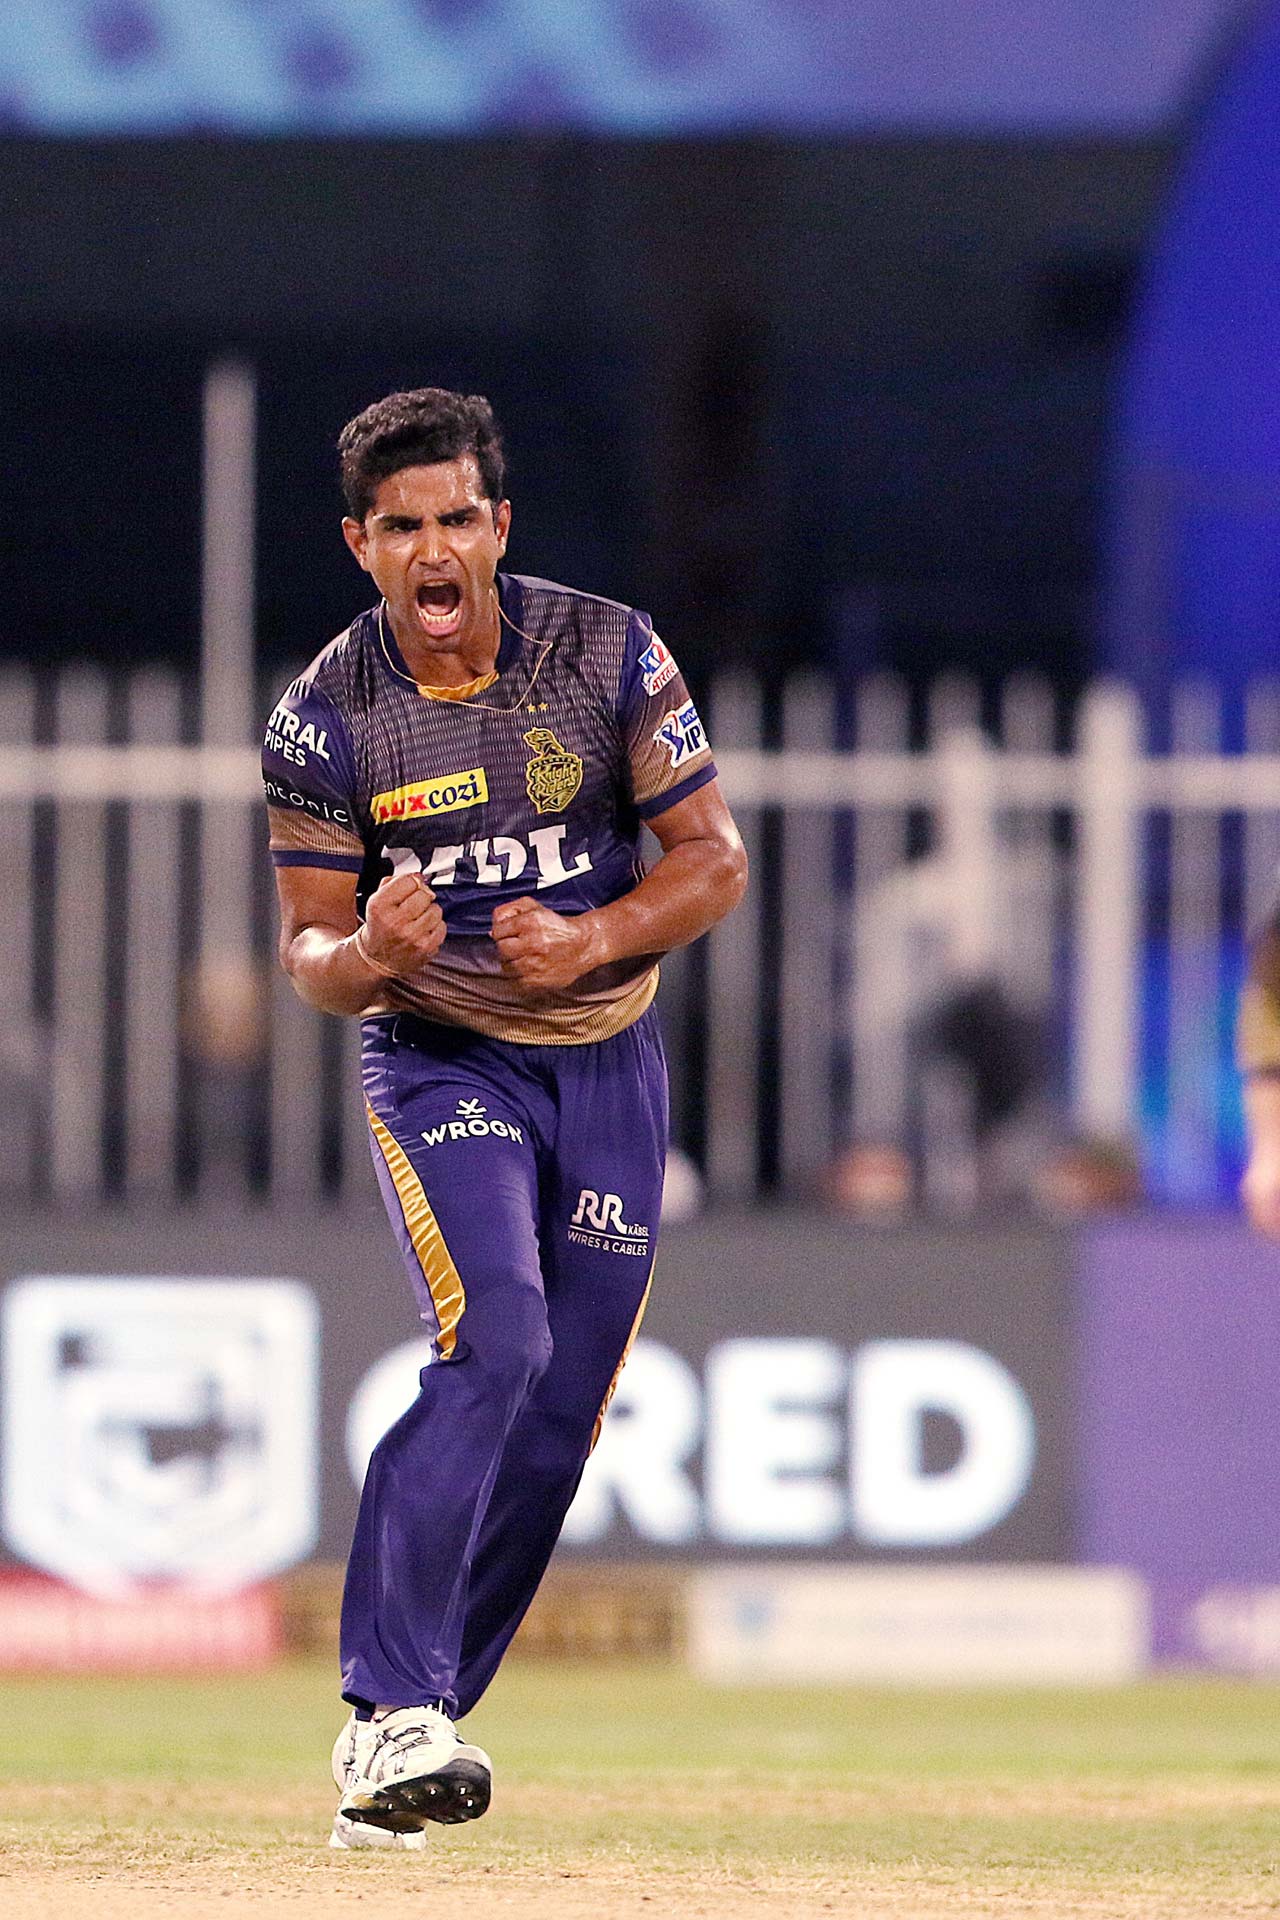 During KKR's match against Rajasthan Royals, Shubman Gill was brilliant with his 56 runs to help the team to 171. But it was Shivam Mavi's vital bowling of 4/21 that helped KKR bag a huge 86-run win to boost their playoff chances